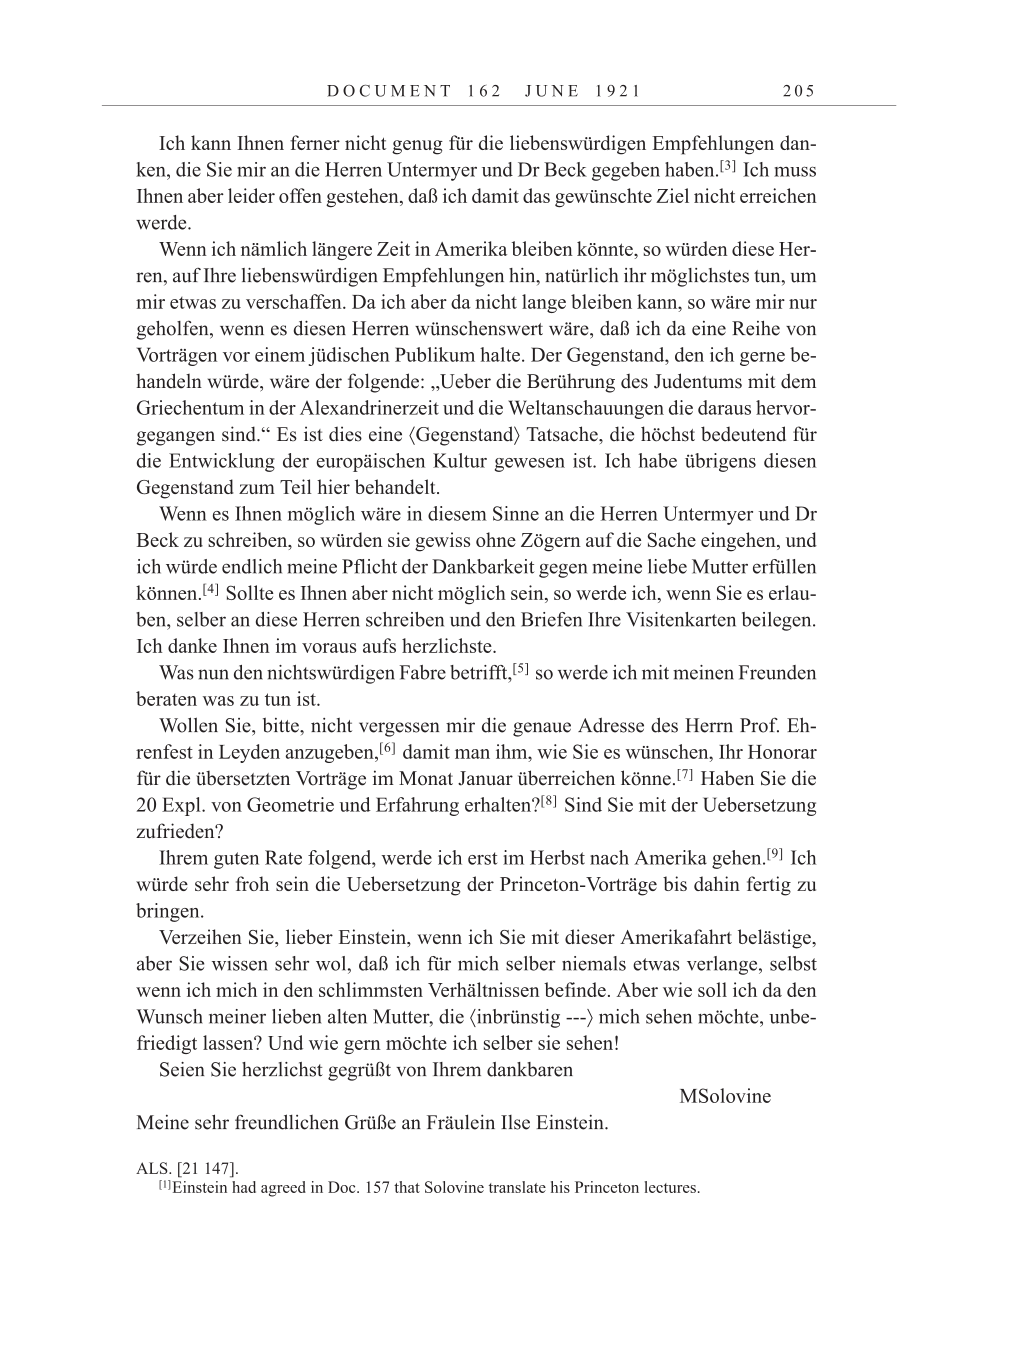 Volume 12: The Berlin Years: Correspondence January-December 1921 page 205